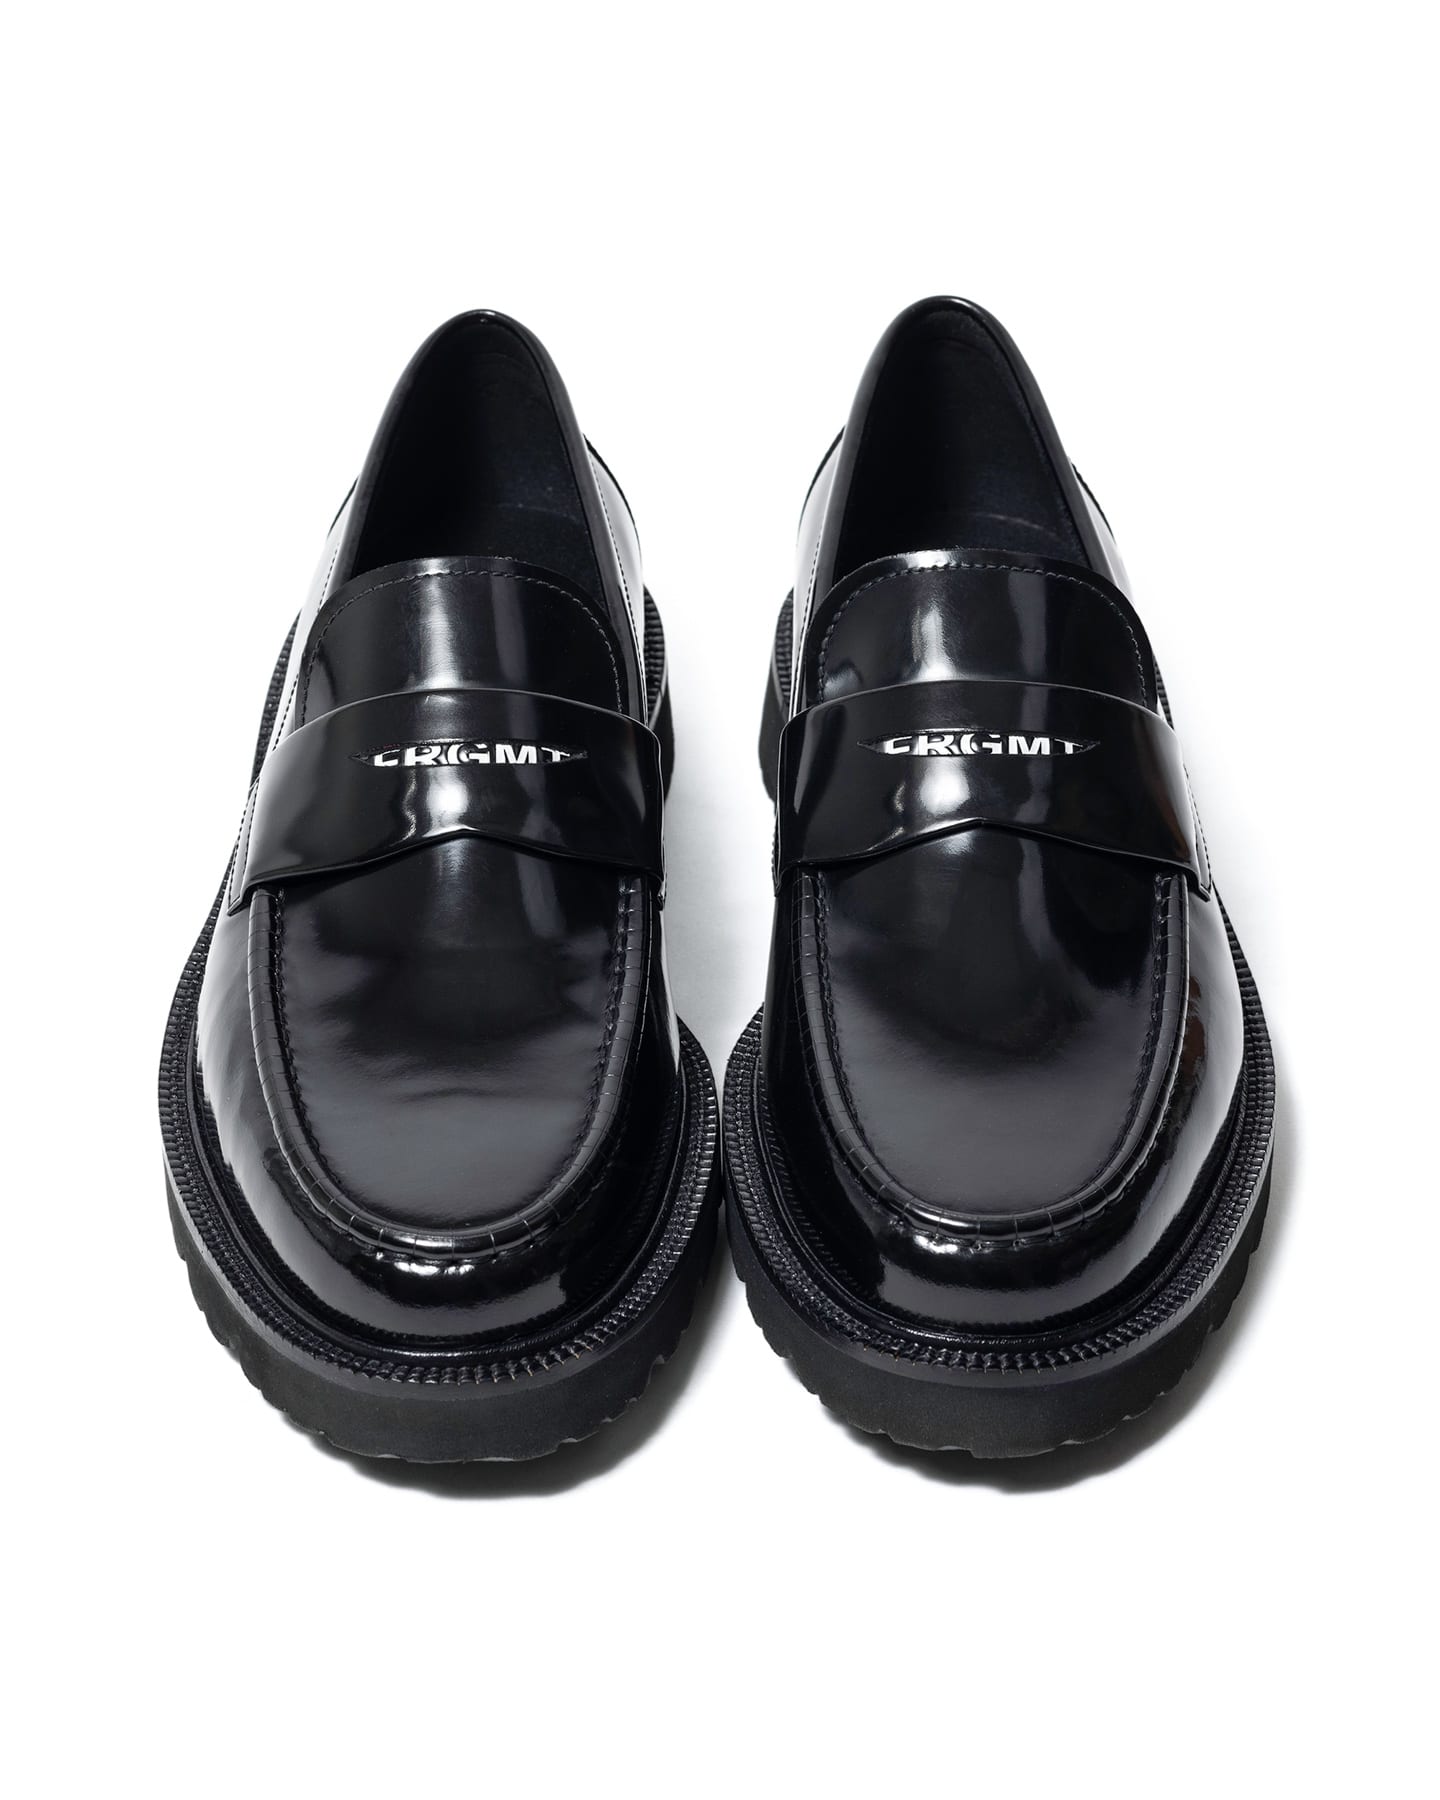 Fragment design Cole Haan penny loaferそちらの金額では難しいです